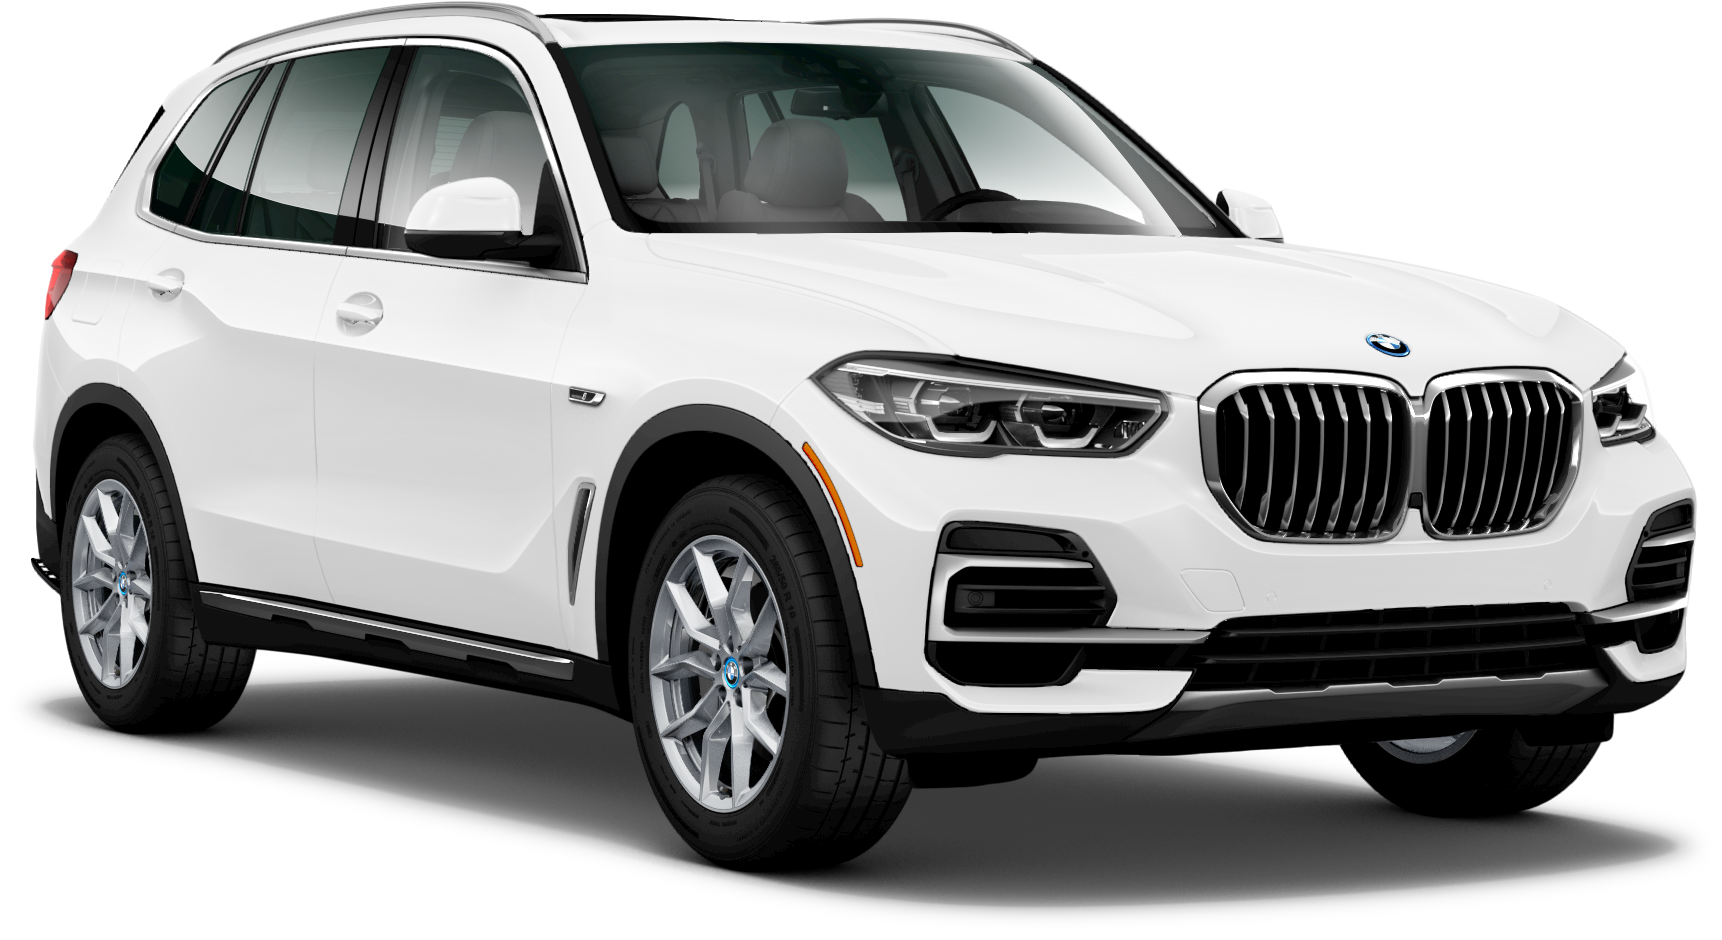 New BMW X5 in Paramus, New Jersey Shop Now!